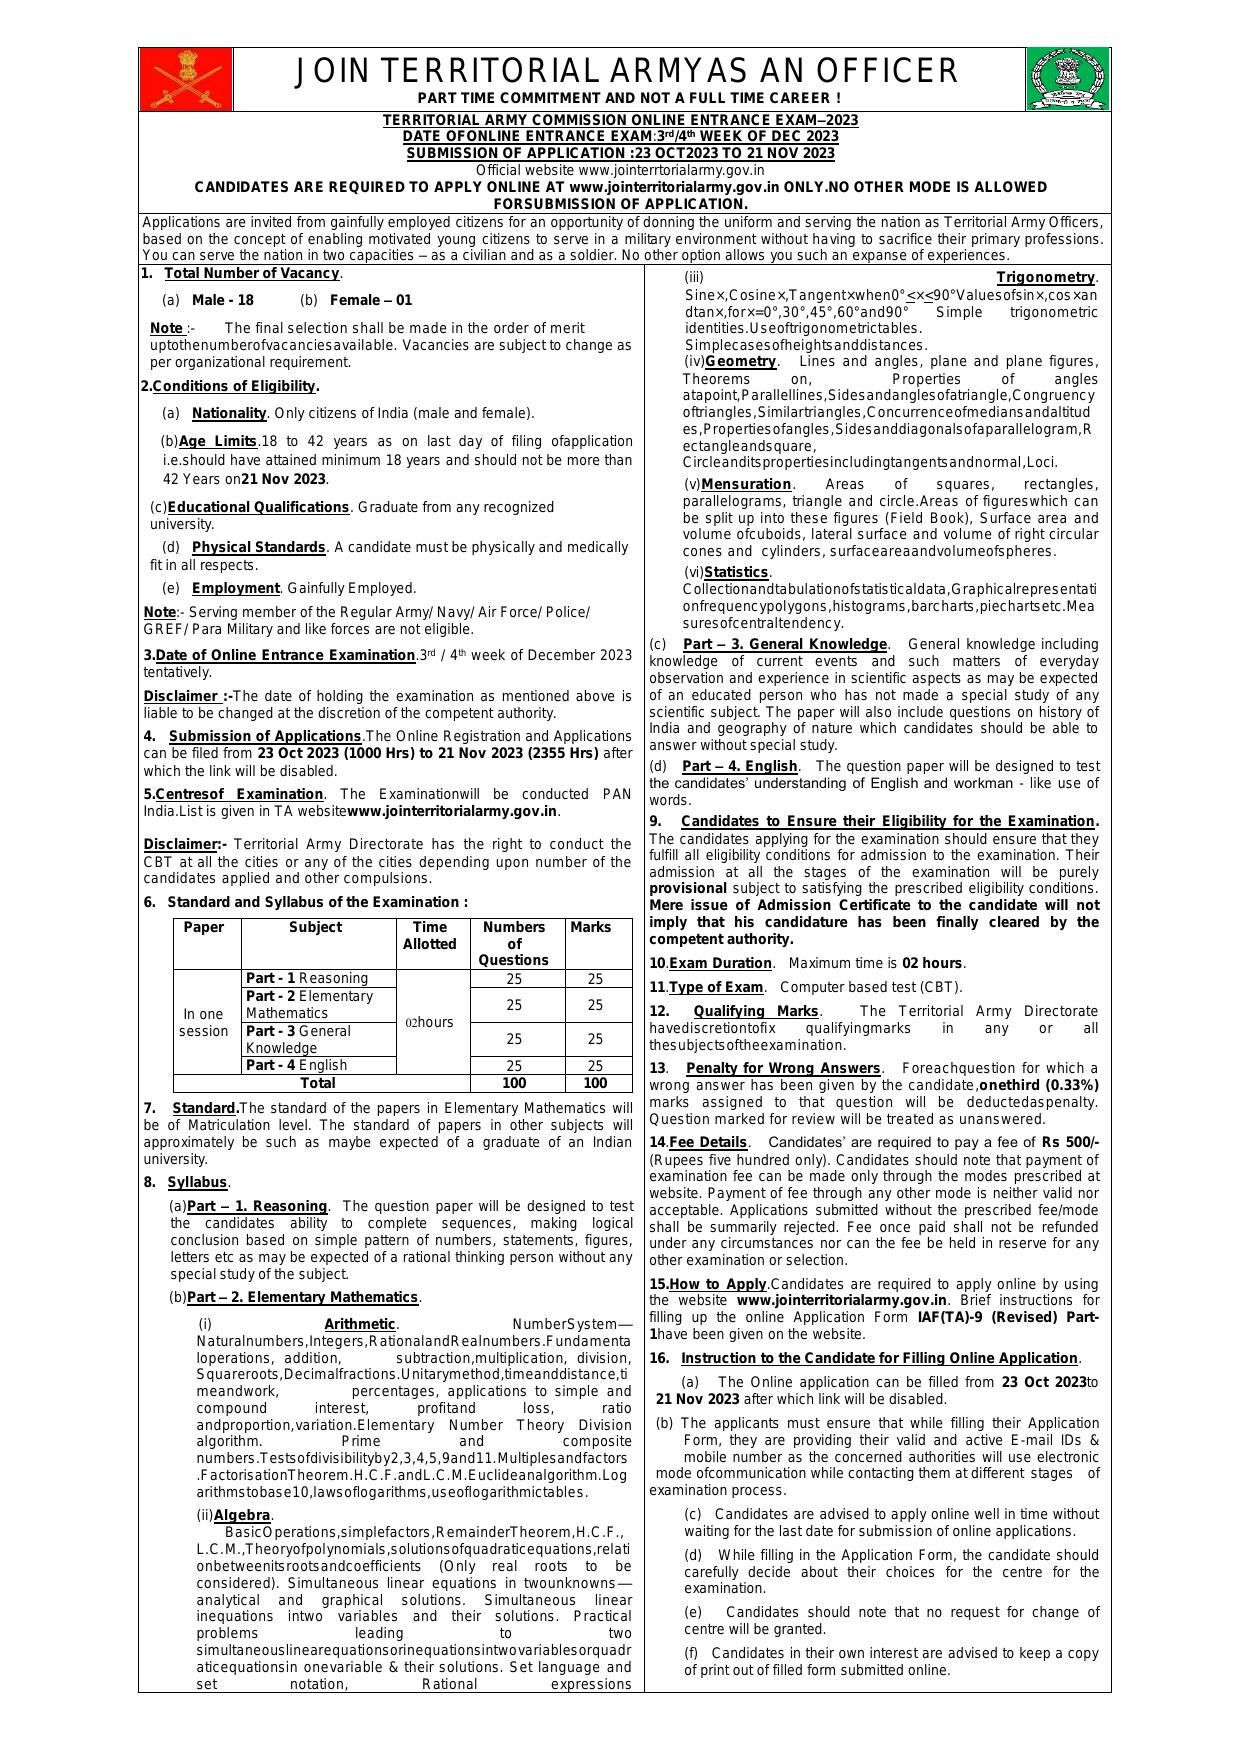 Territorial Army Army Officer Recruitment 2023 - Page 3